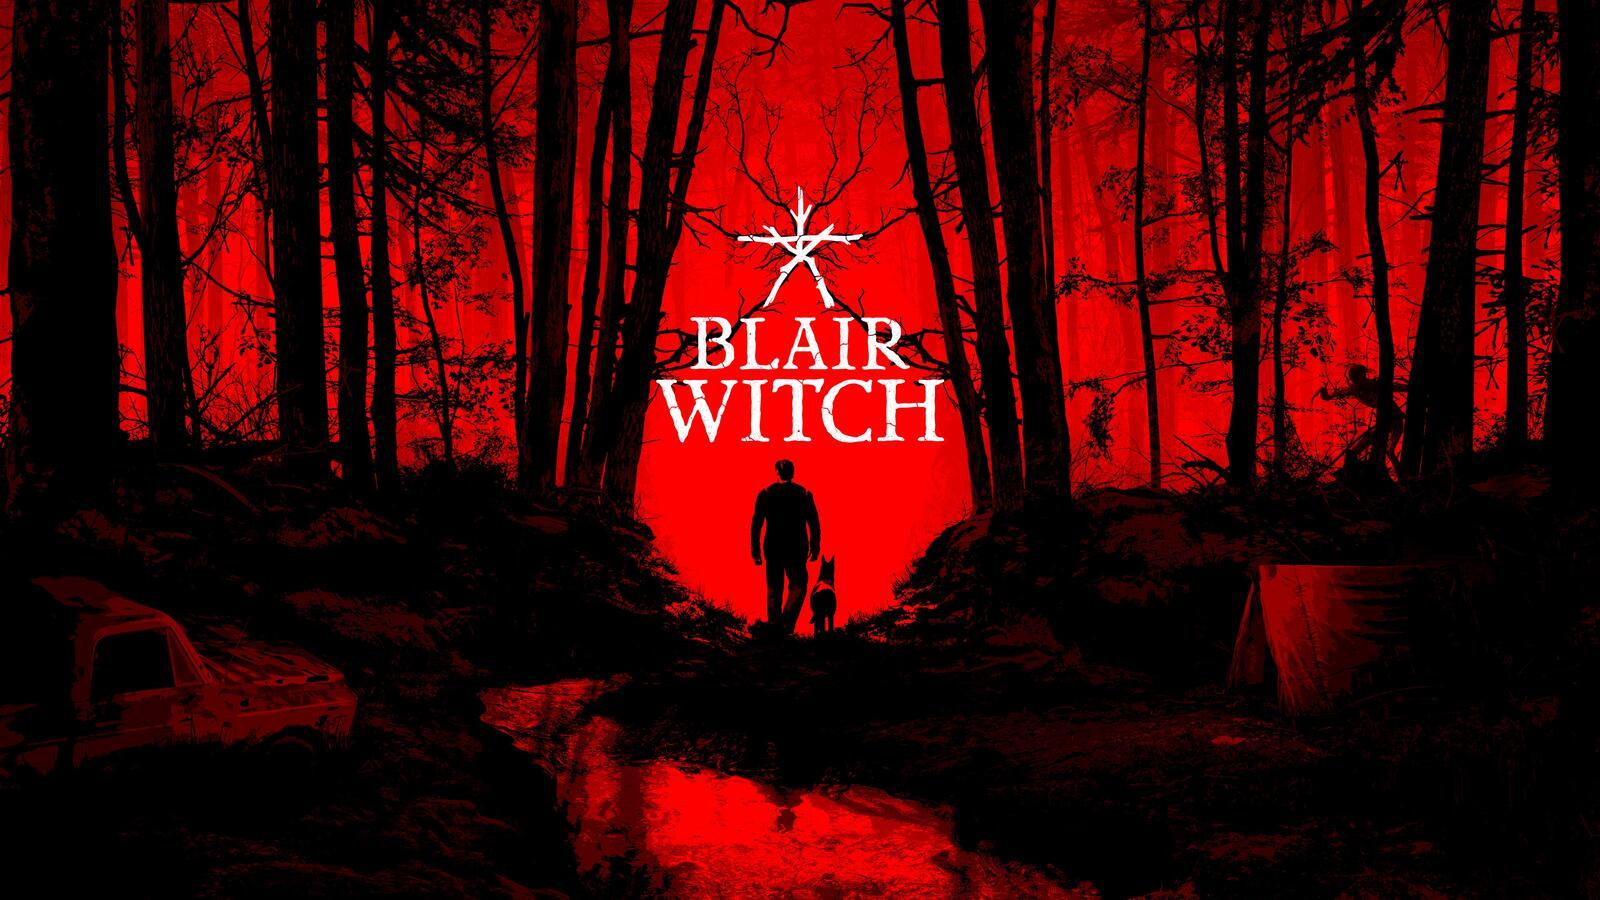 Wallpapers games blair witch 2019 games on the desktop